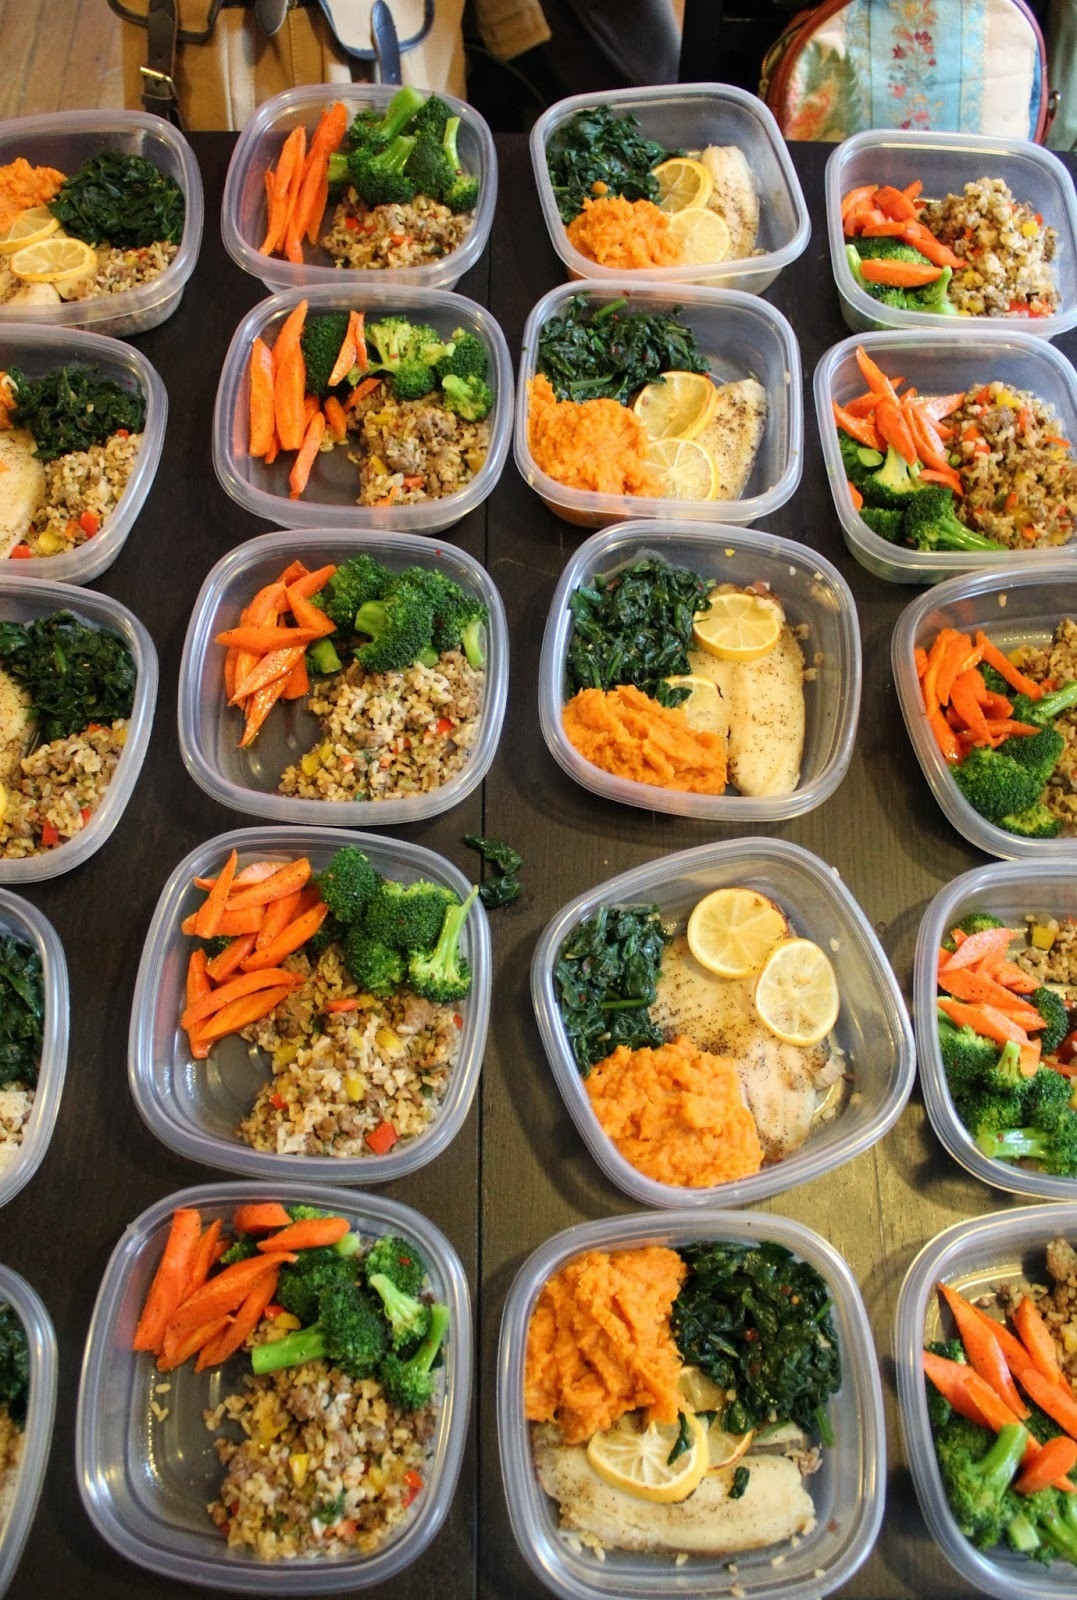 Healthy Lunches And Dinners
 Healthy Meal Prep Ideas For The WeekWritings and Papers